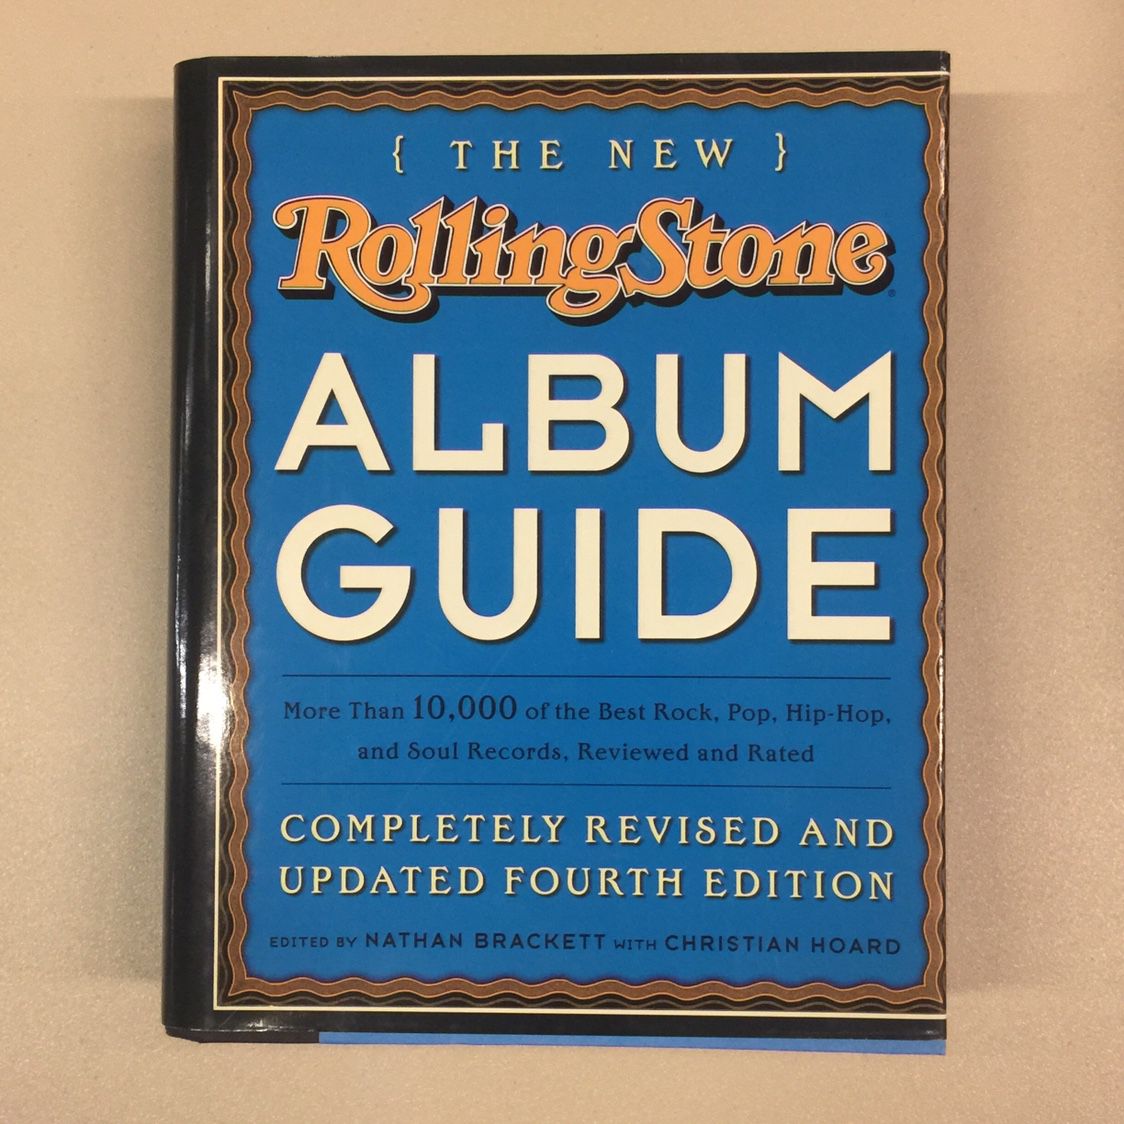 The New Rolling Stone Album Guide Revised Fourth Edition